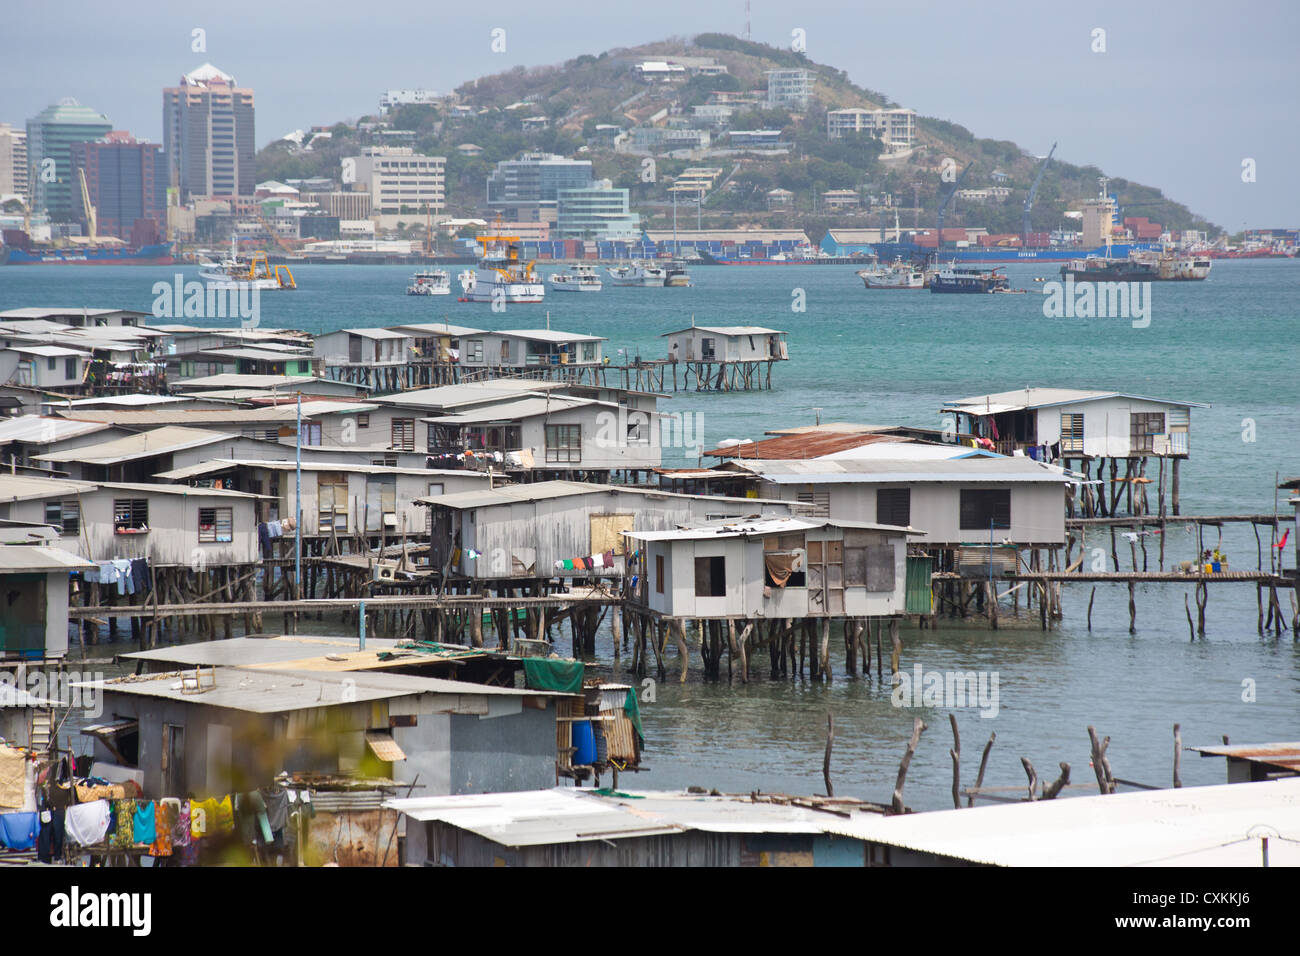 View of the water village, Hanoabada, with Port Moresby in the background, Papua New Guinea Stock Photo